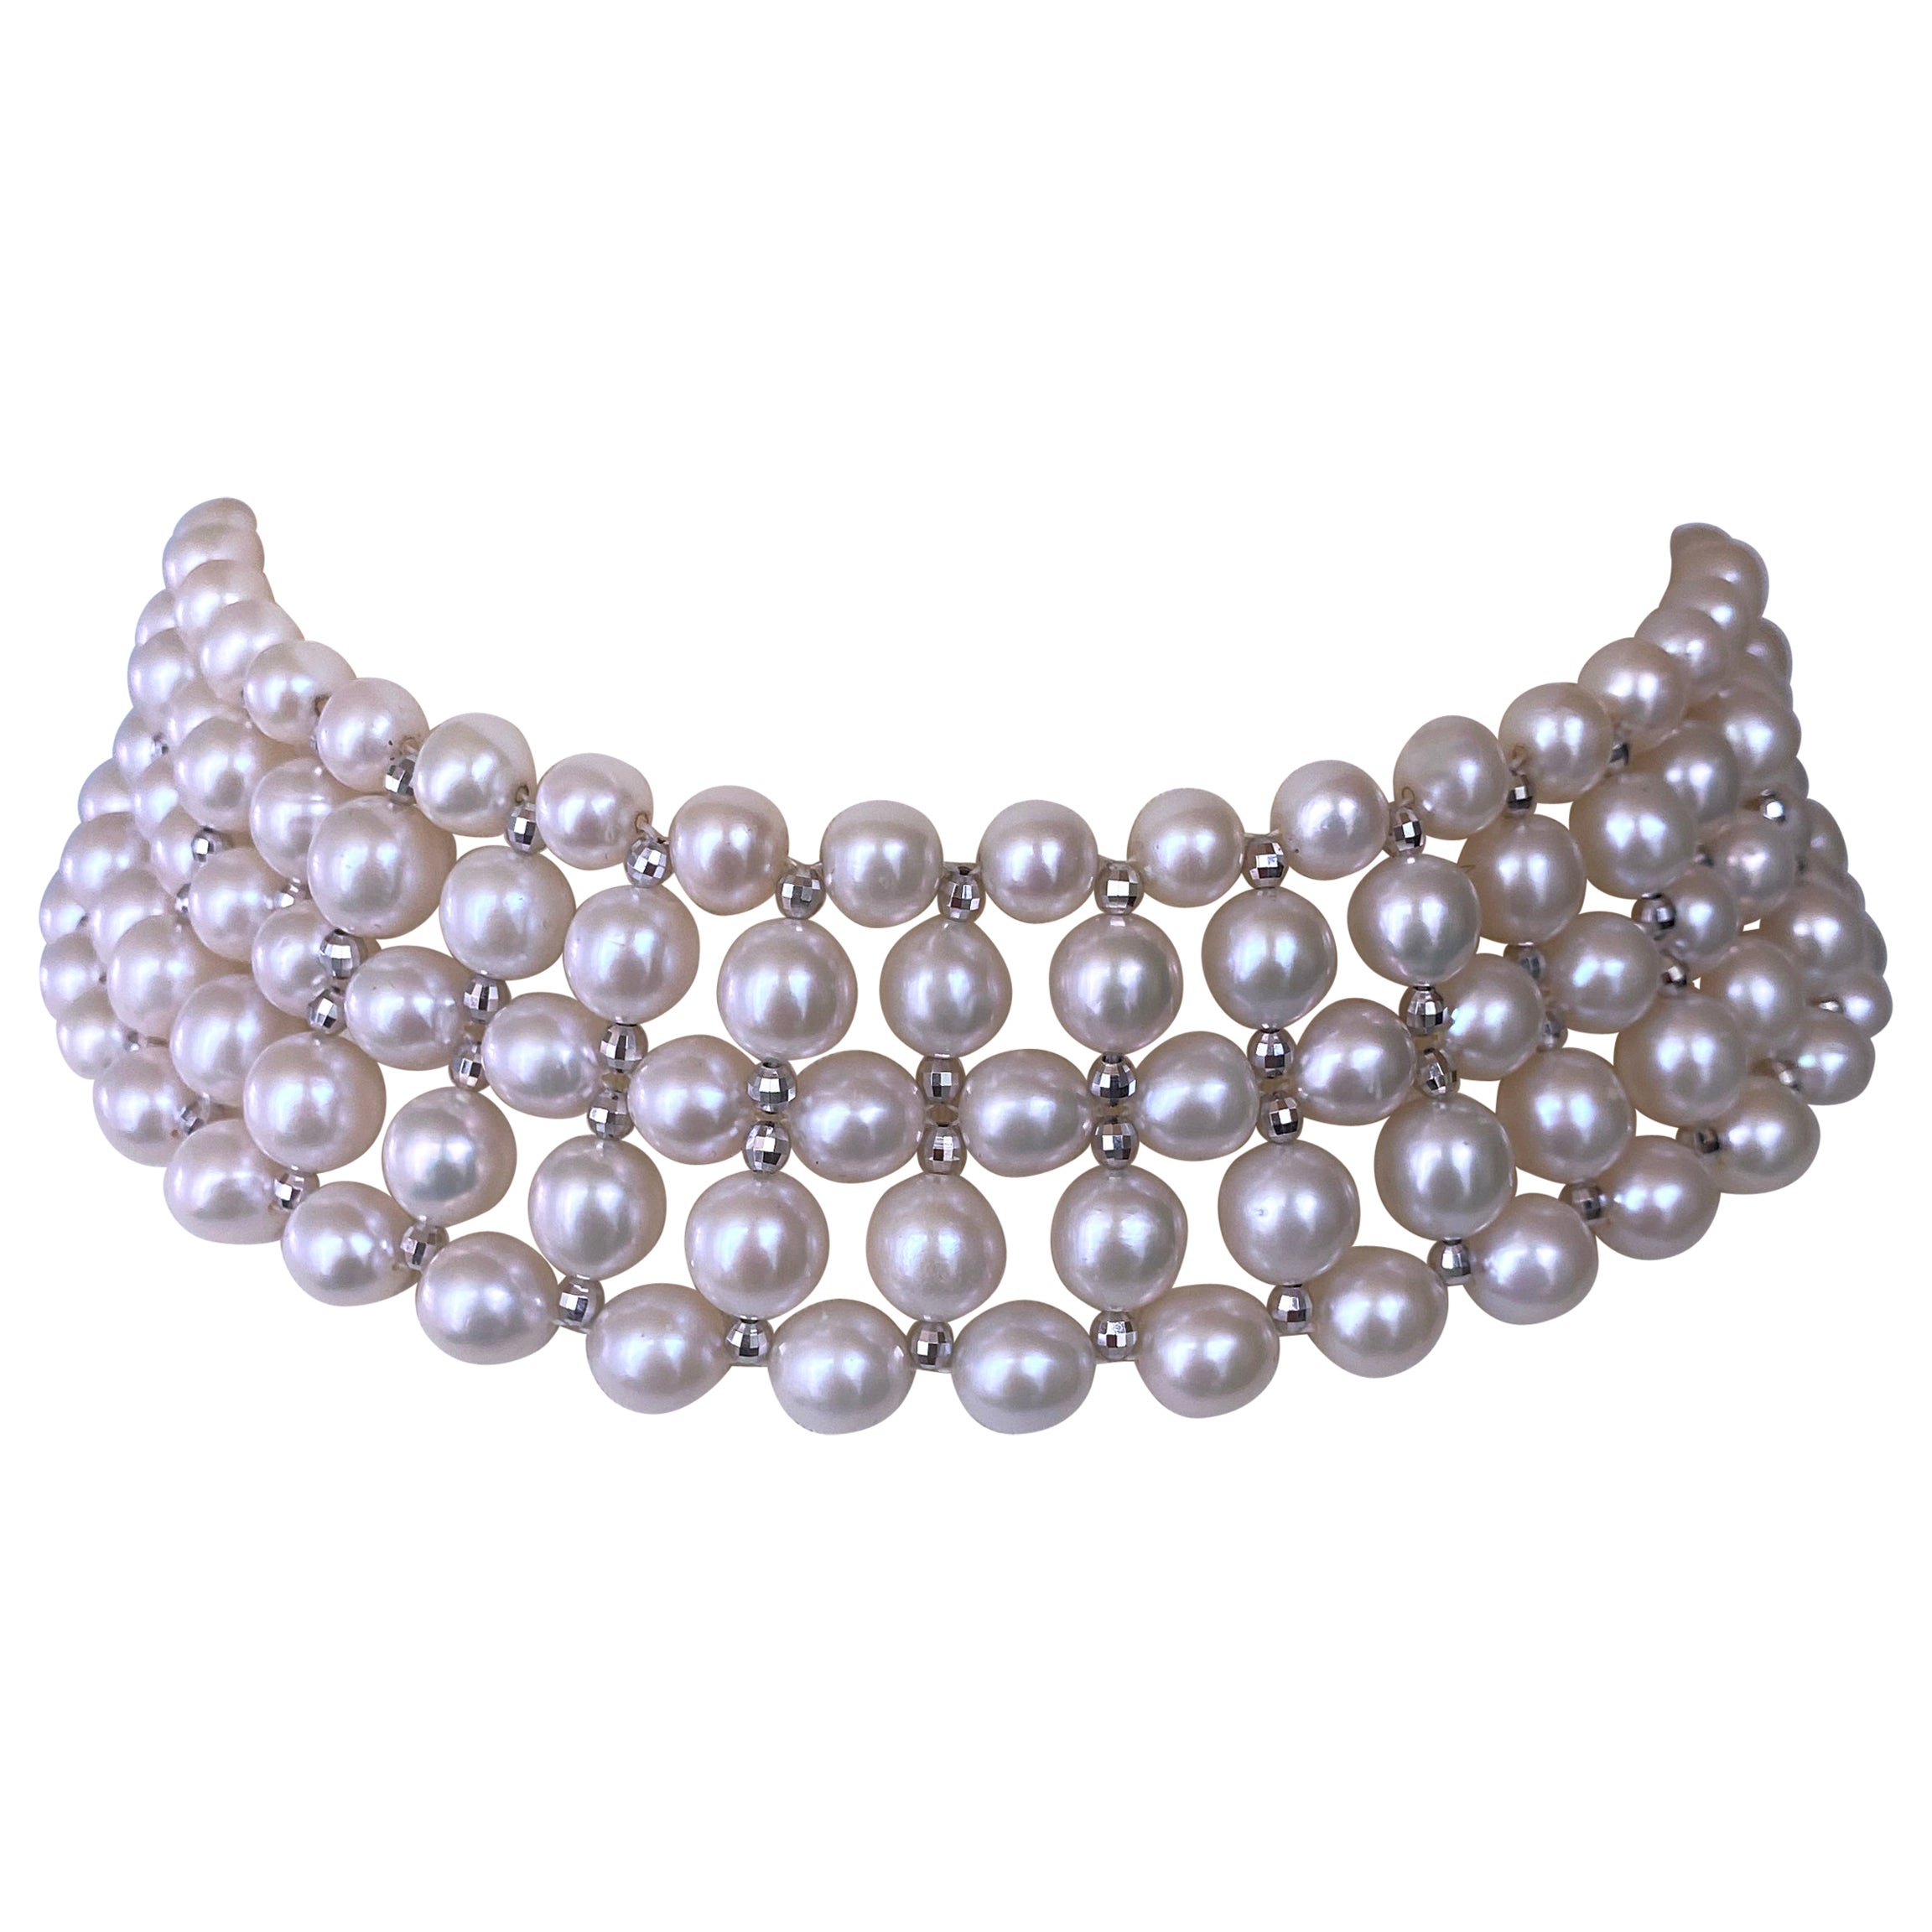 Marina J. Woven Pearl Choker with Silver Rhodium Plated Disco Accents